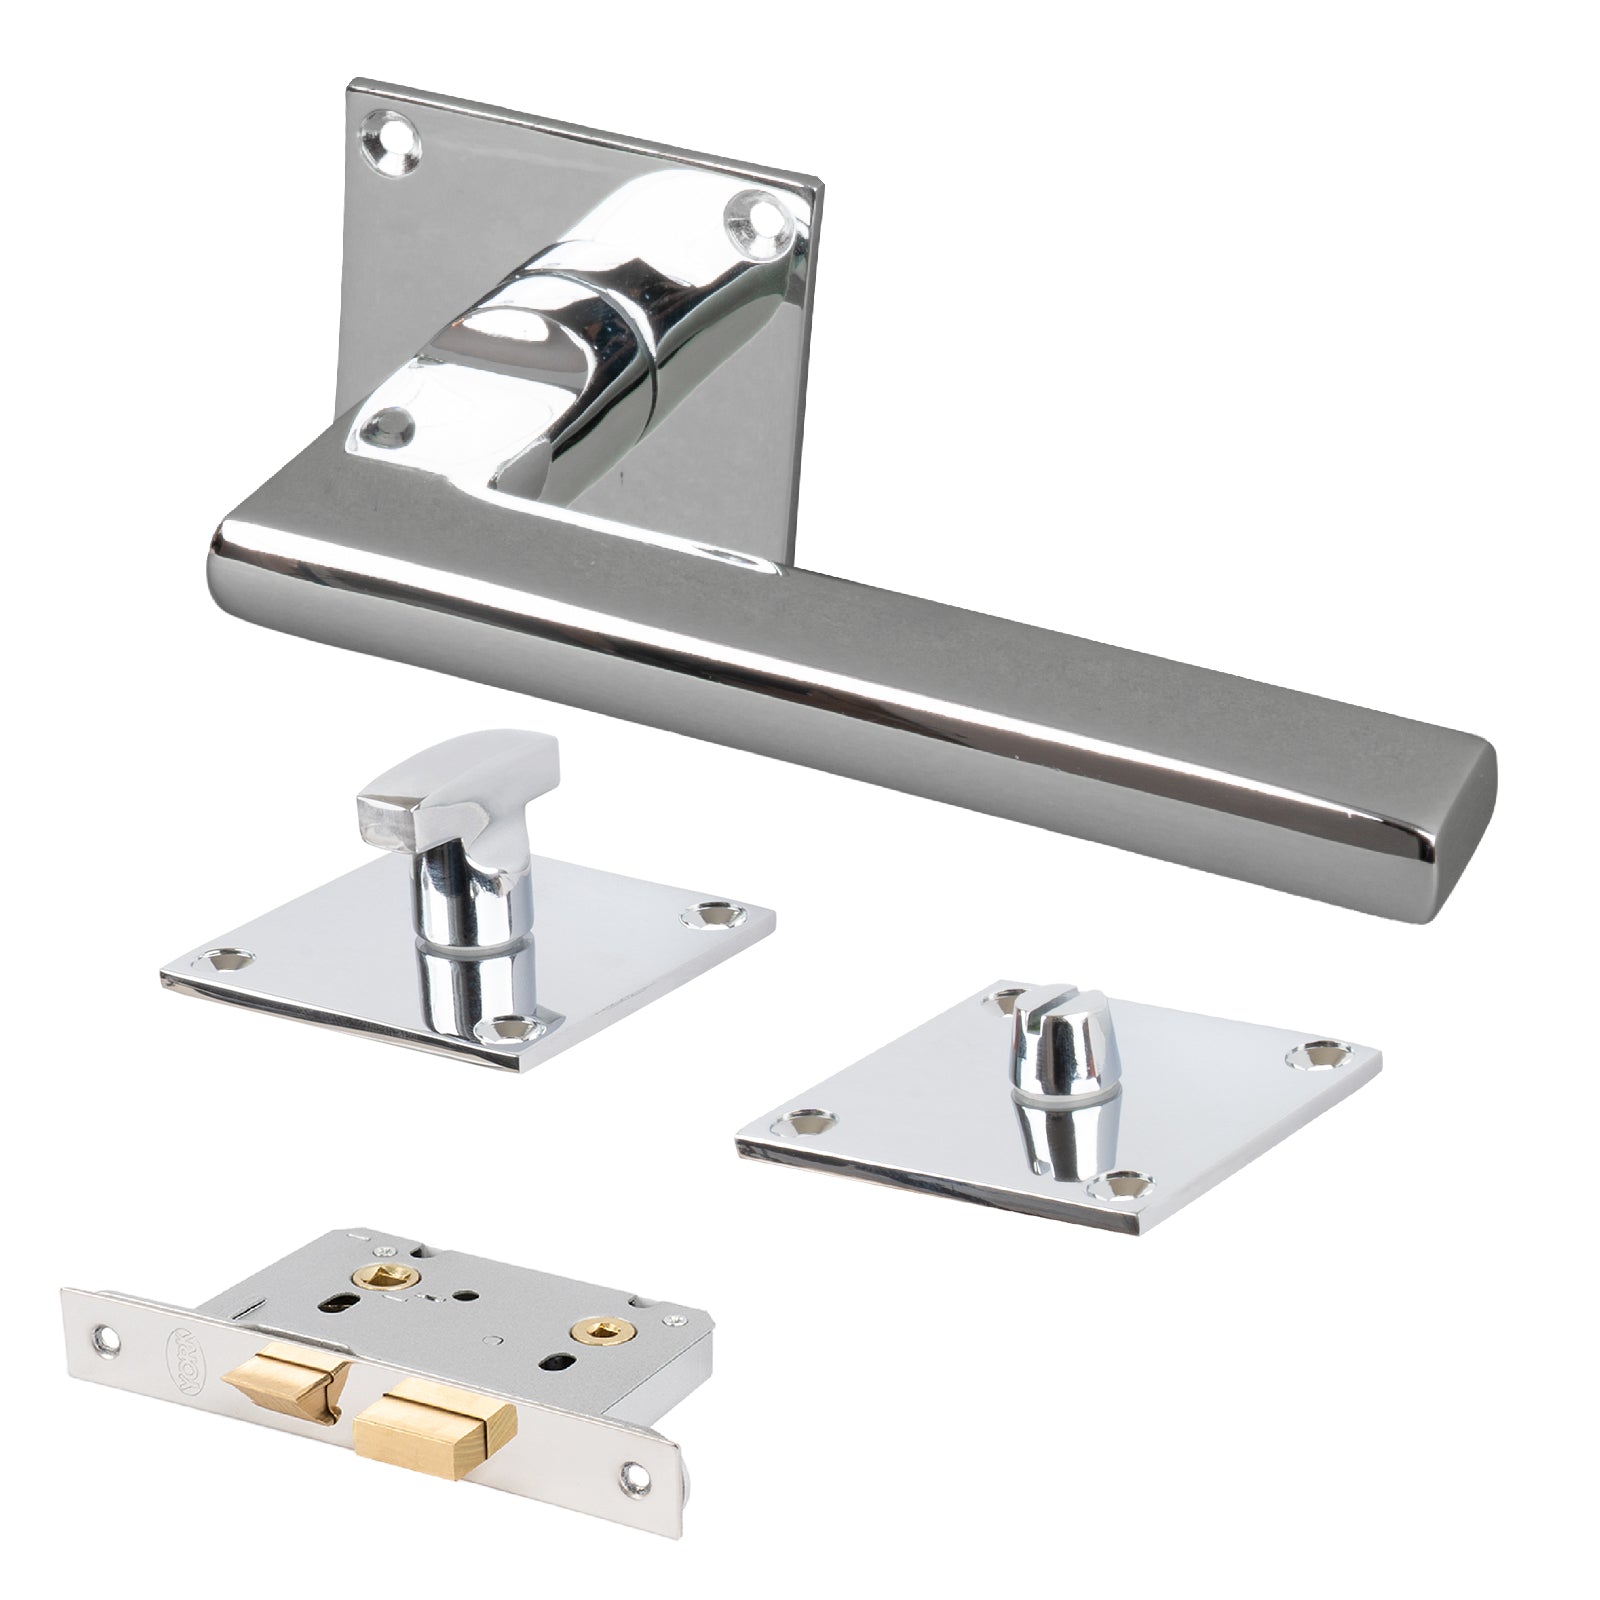 SHOW Trident Square Rose Door Handles Bathroom Set with Polished Chrome finish